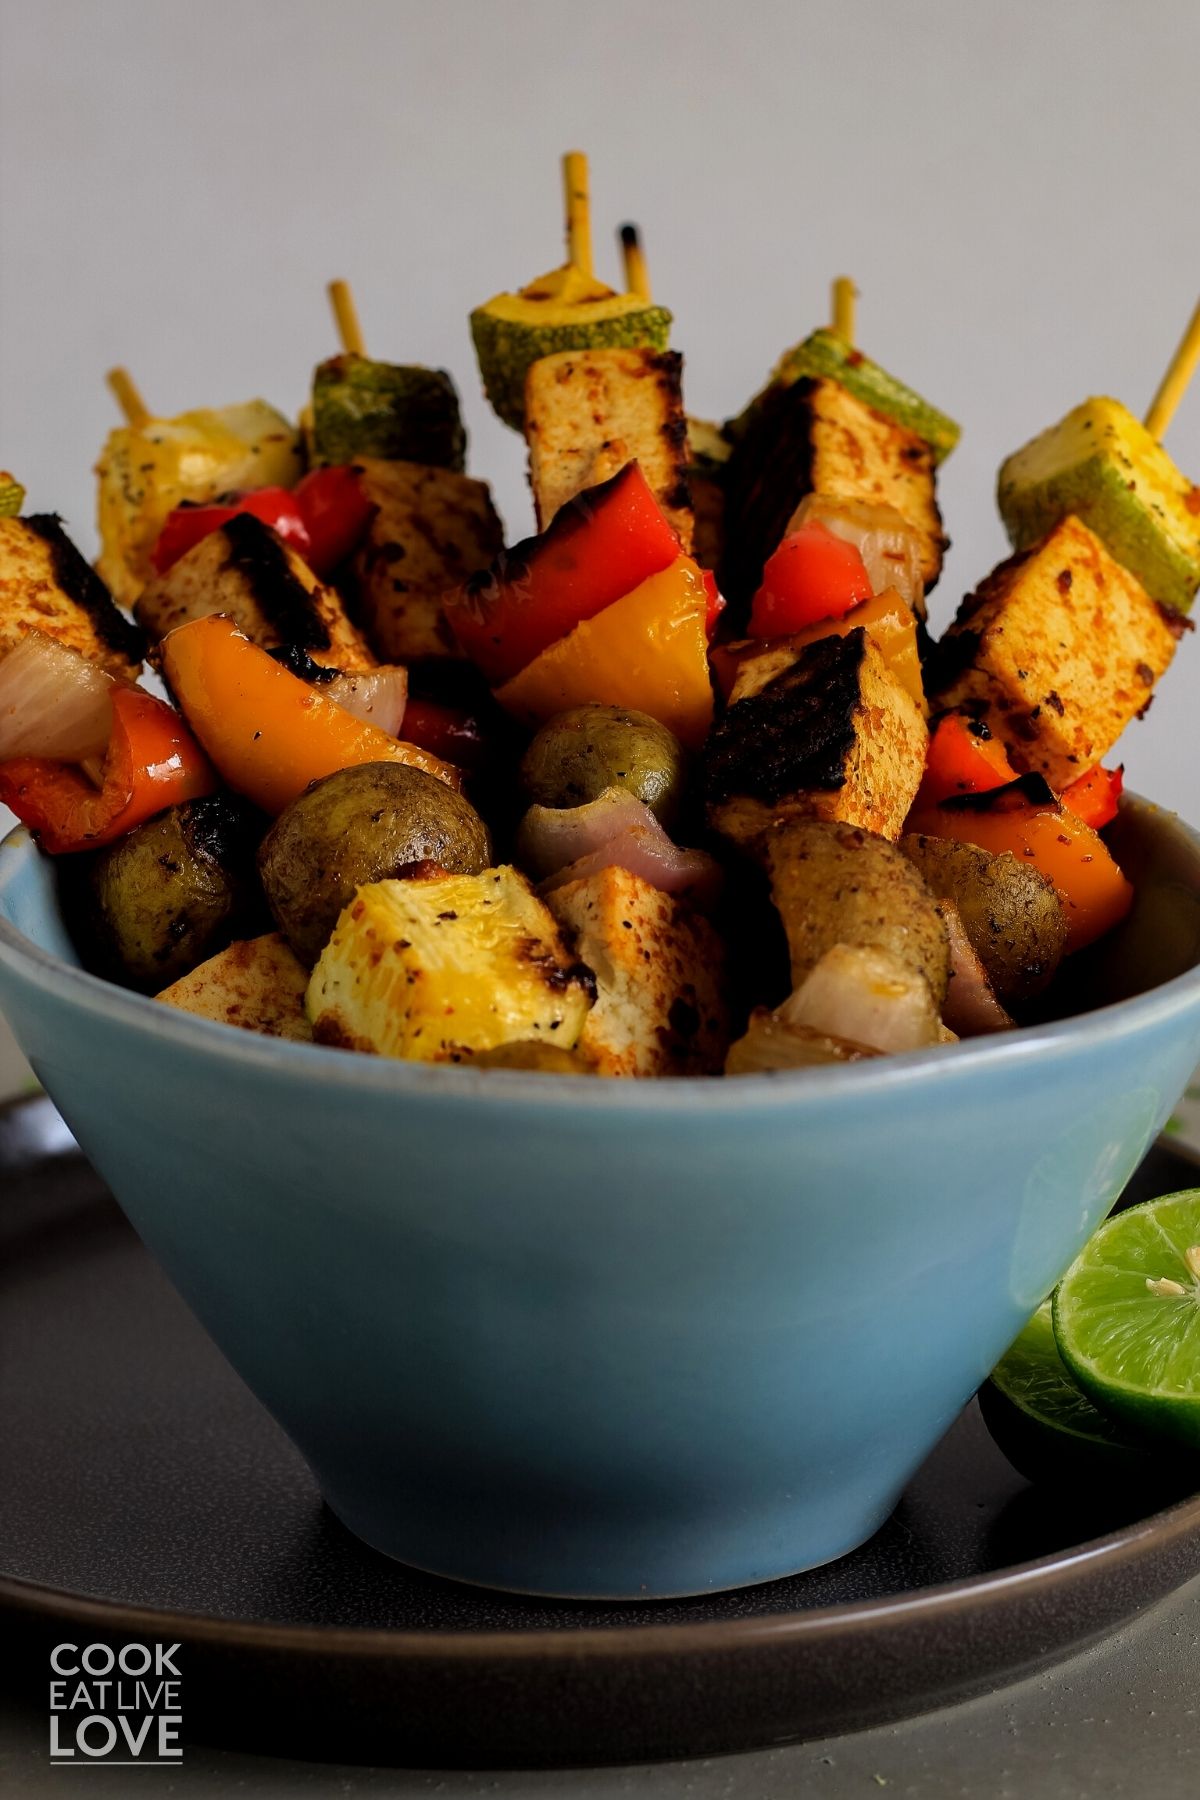 Grilled tofu skewers in a bowl on a plate with a lime half.